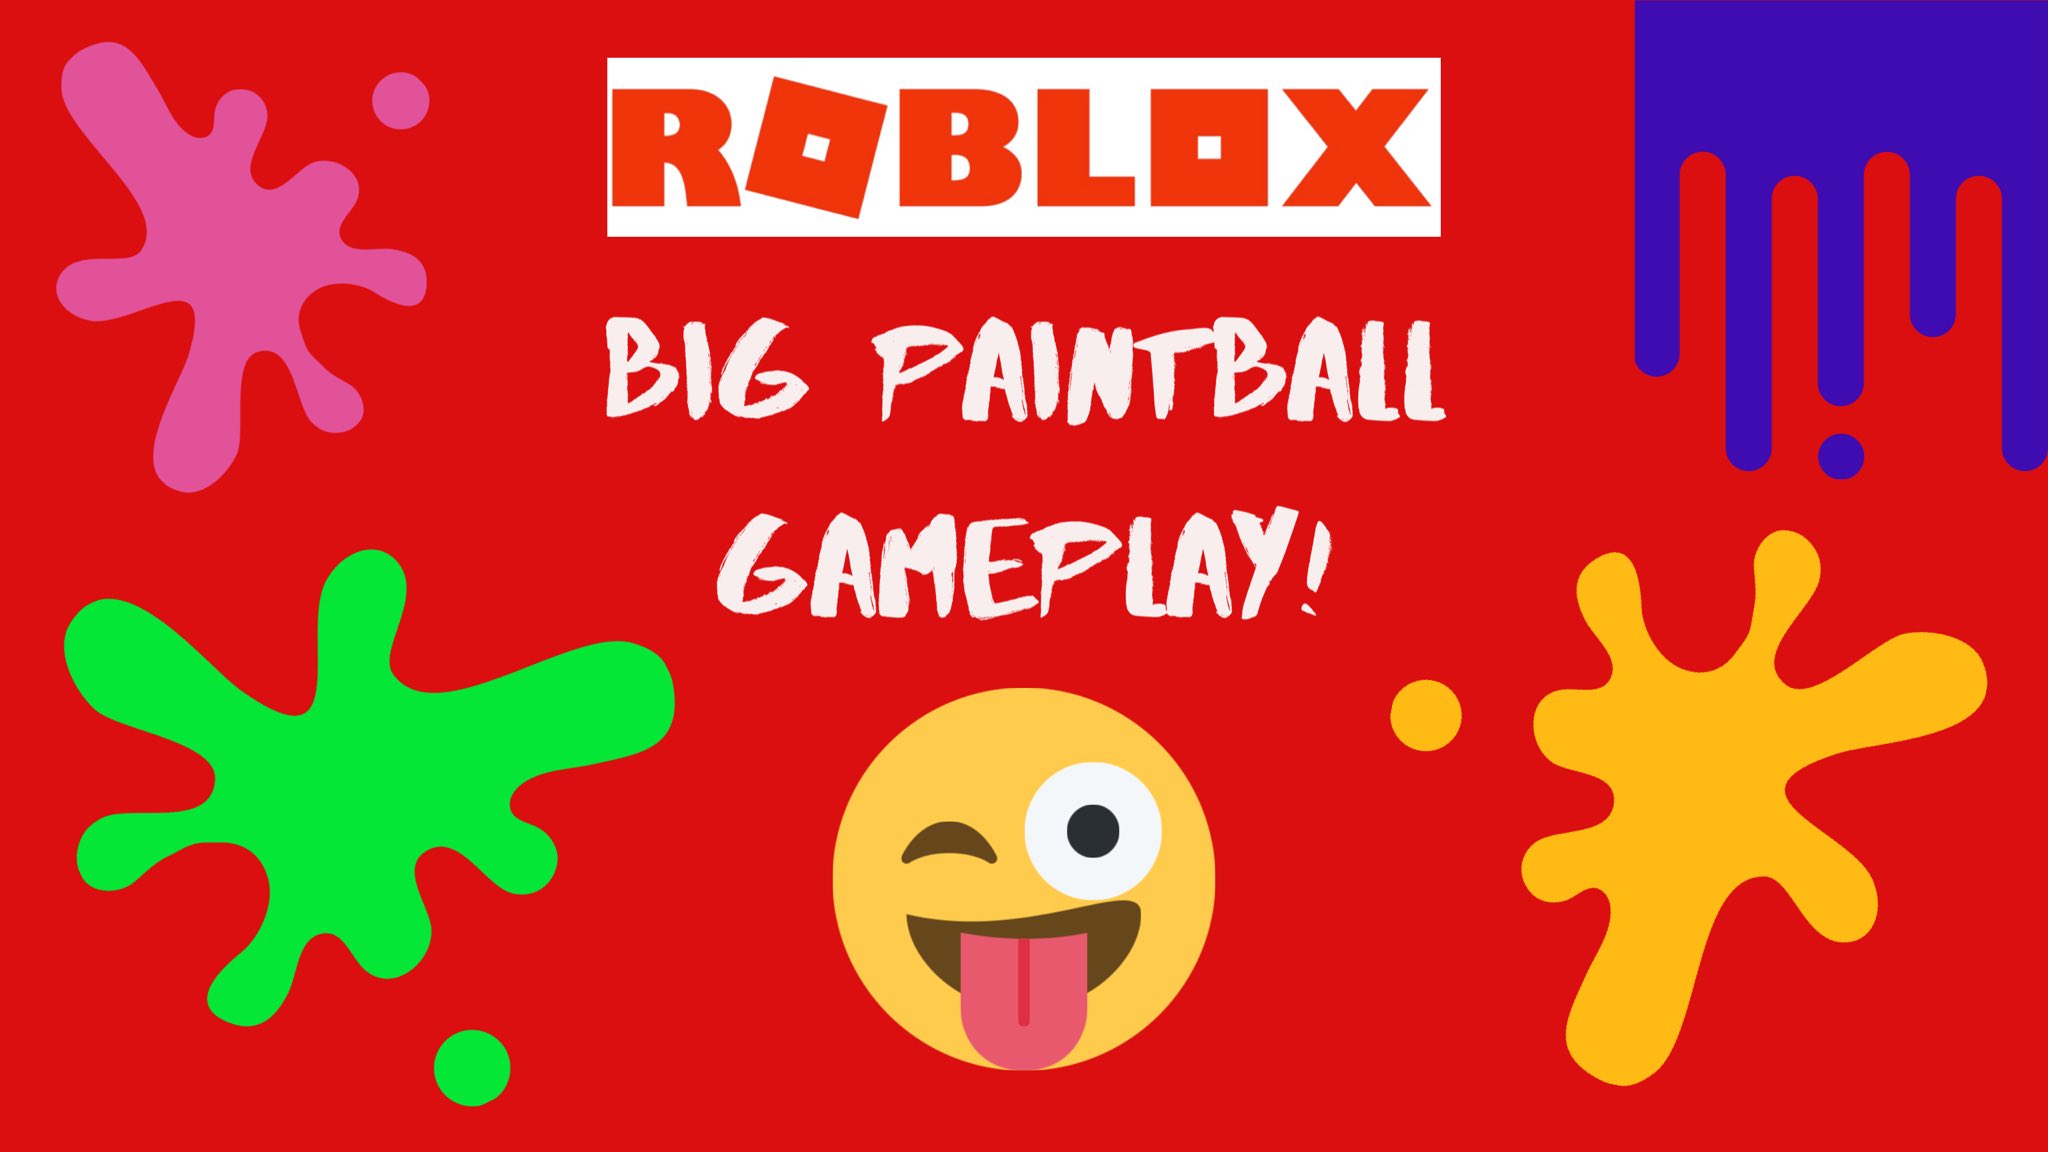 Deathbotbrothers On Twitter Roblox Gameplay Big Paintball I M New To This Game I Really Like It Https T Co Adyj7b4sjh Via Youtube Roblox Robloxgameplay Robloxbigpaintball Robloxpaintball Robloxpaintballgameplay - new big paintball roblox big paintball release update youtube